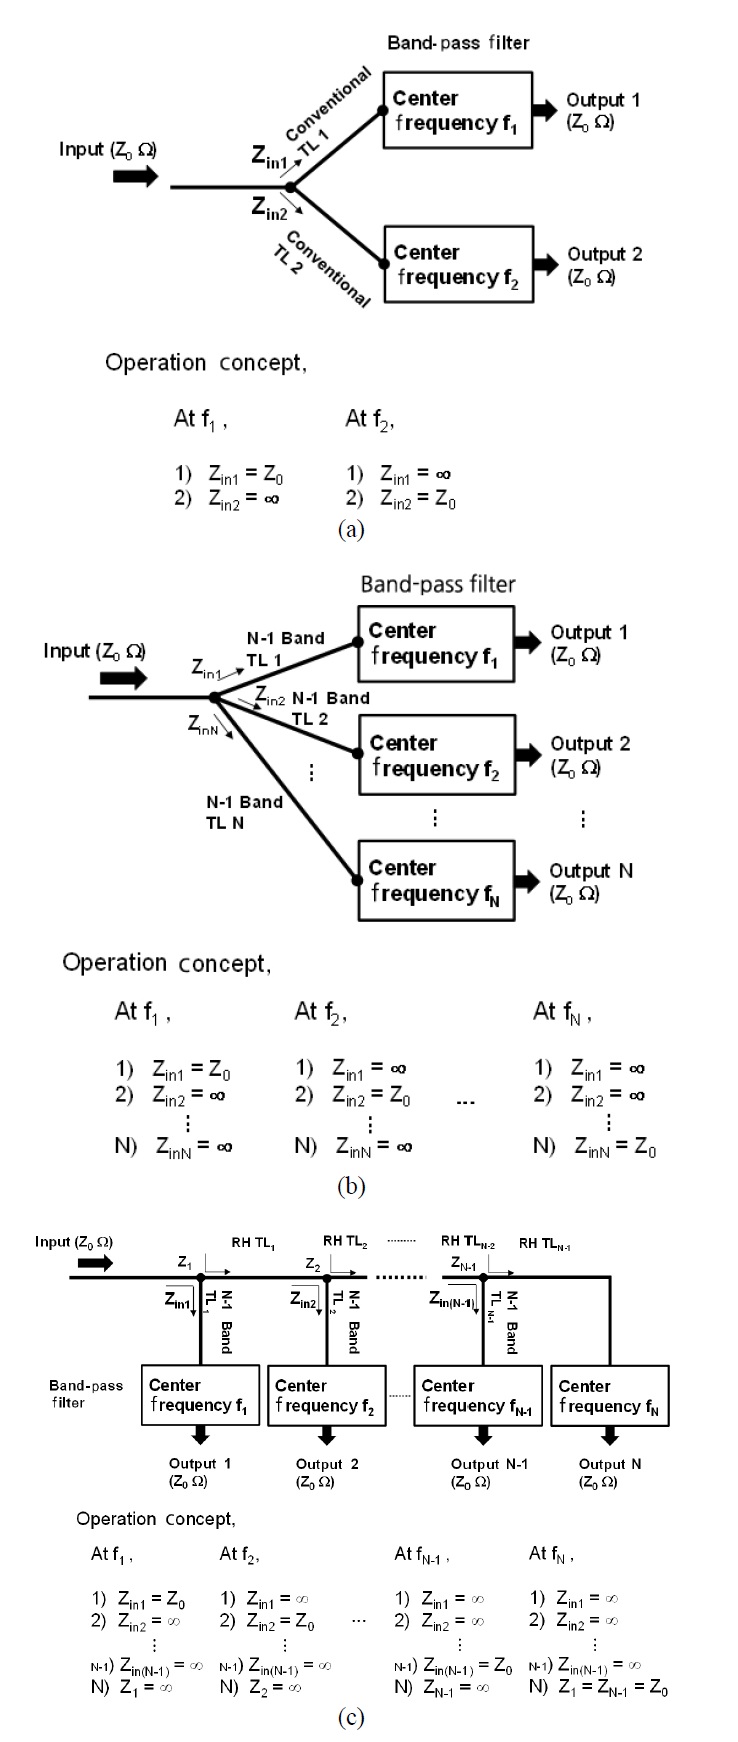 Diagrams and operation concepts of multiplexers based on isolation circuit: (a) diplexer, (b) star-junction multiplexer, and (c) manifold-junction multiplexer. RH TL=right-handed transmission line.